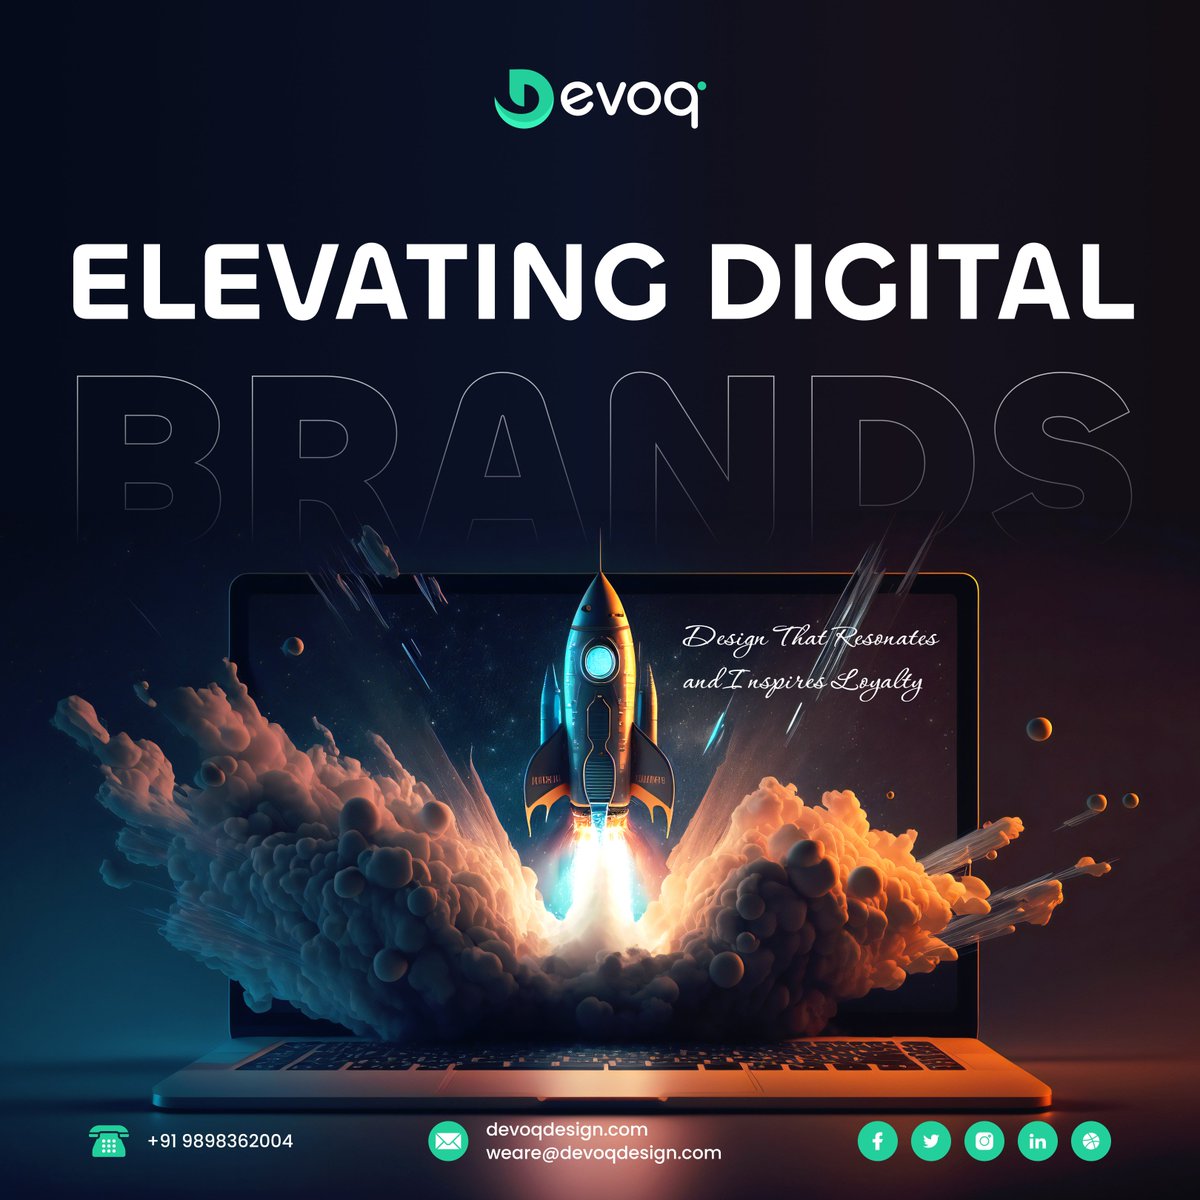 Tired of digital designs that blend into the background? Let's elevate your brand with UI/UX that has users saying 'heck yes!

Visit our website for more details : devoqdesign.com  

Email Us : sales@devoqdesign.com 

#UIUX #UXUI #UIUXDesign #UXUIDesign #UserExperience